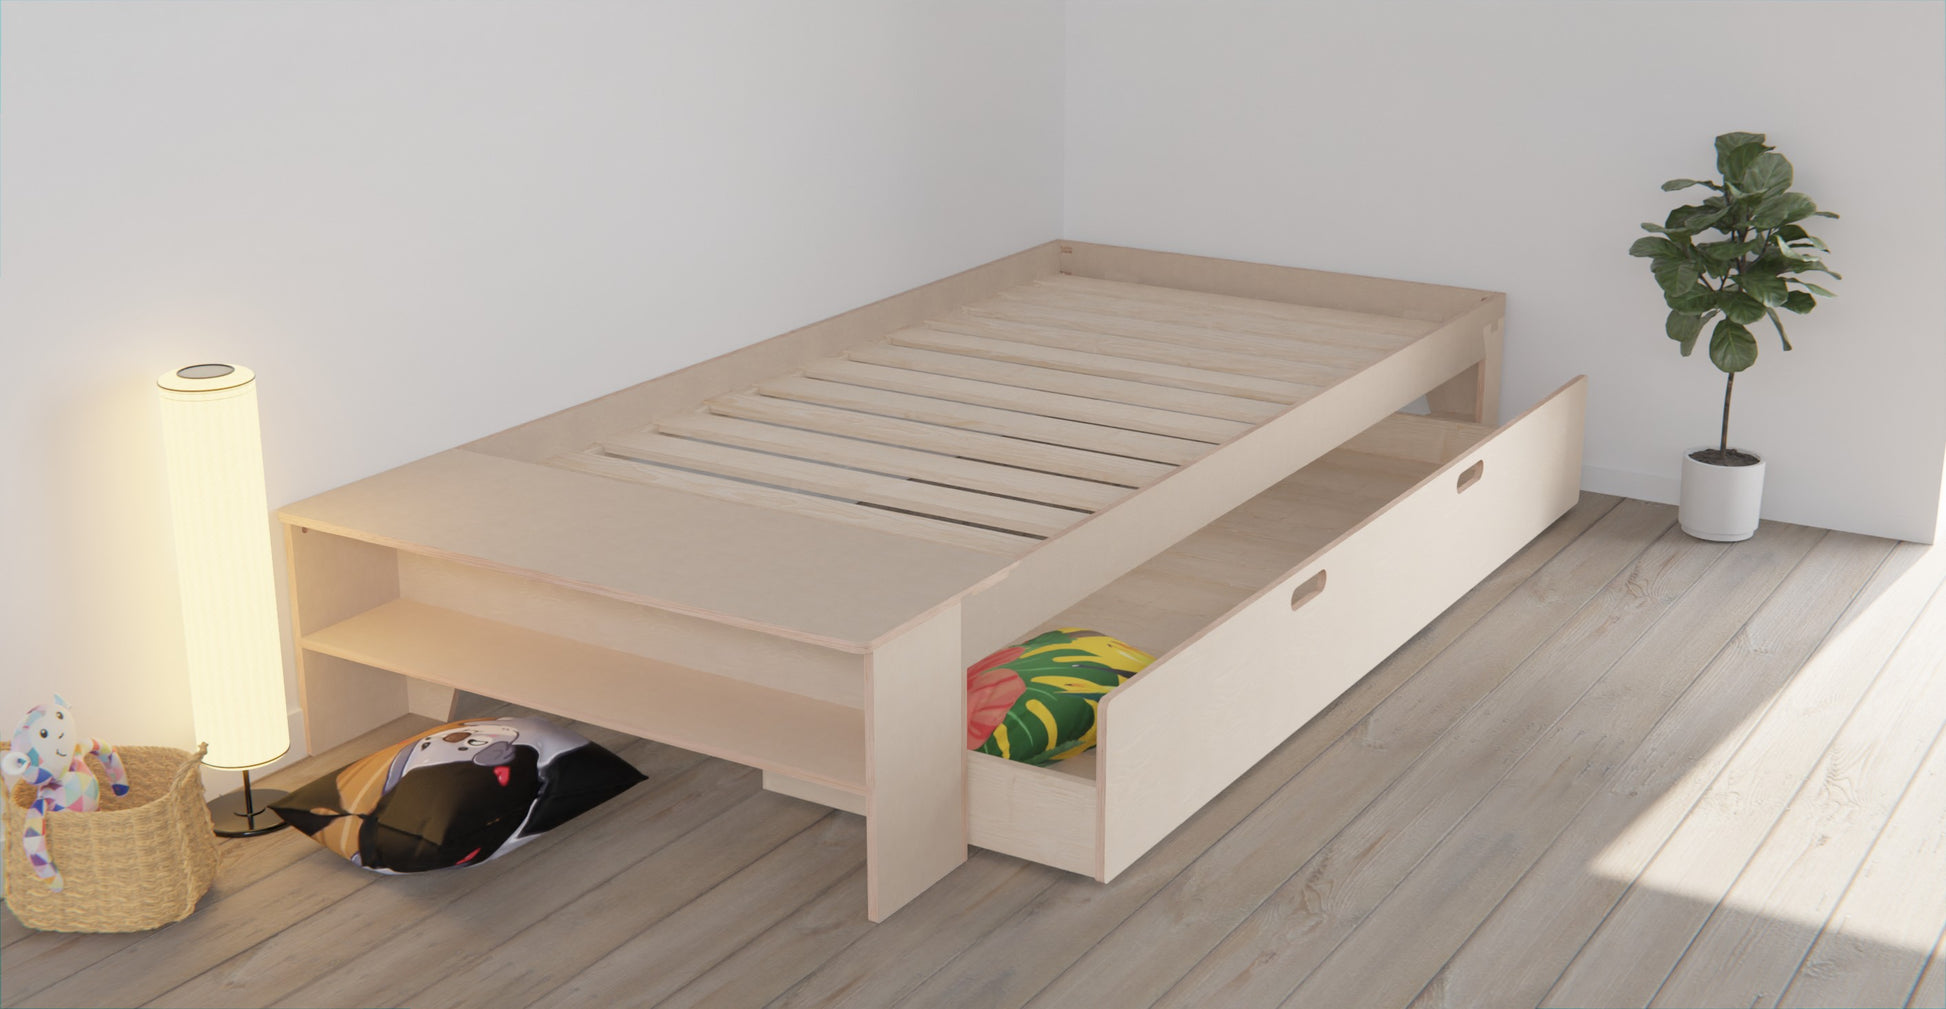 Upgrade your kids bedroom with our versatile plywood floor bed. Low profile, storage drawer, and a range of guardrail options for a comfortable night's sleep.